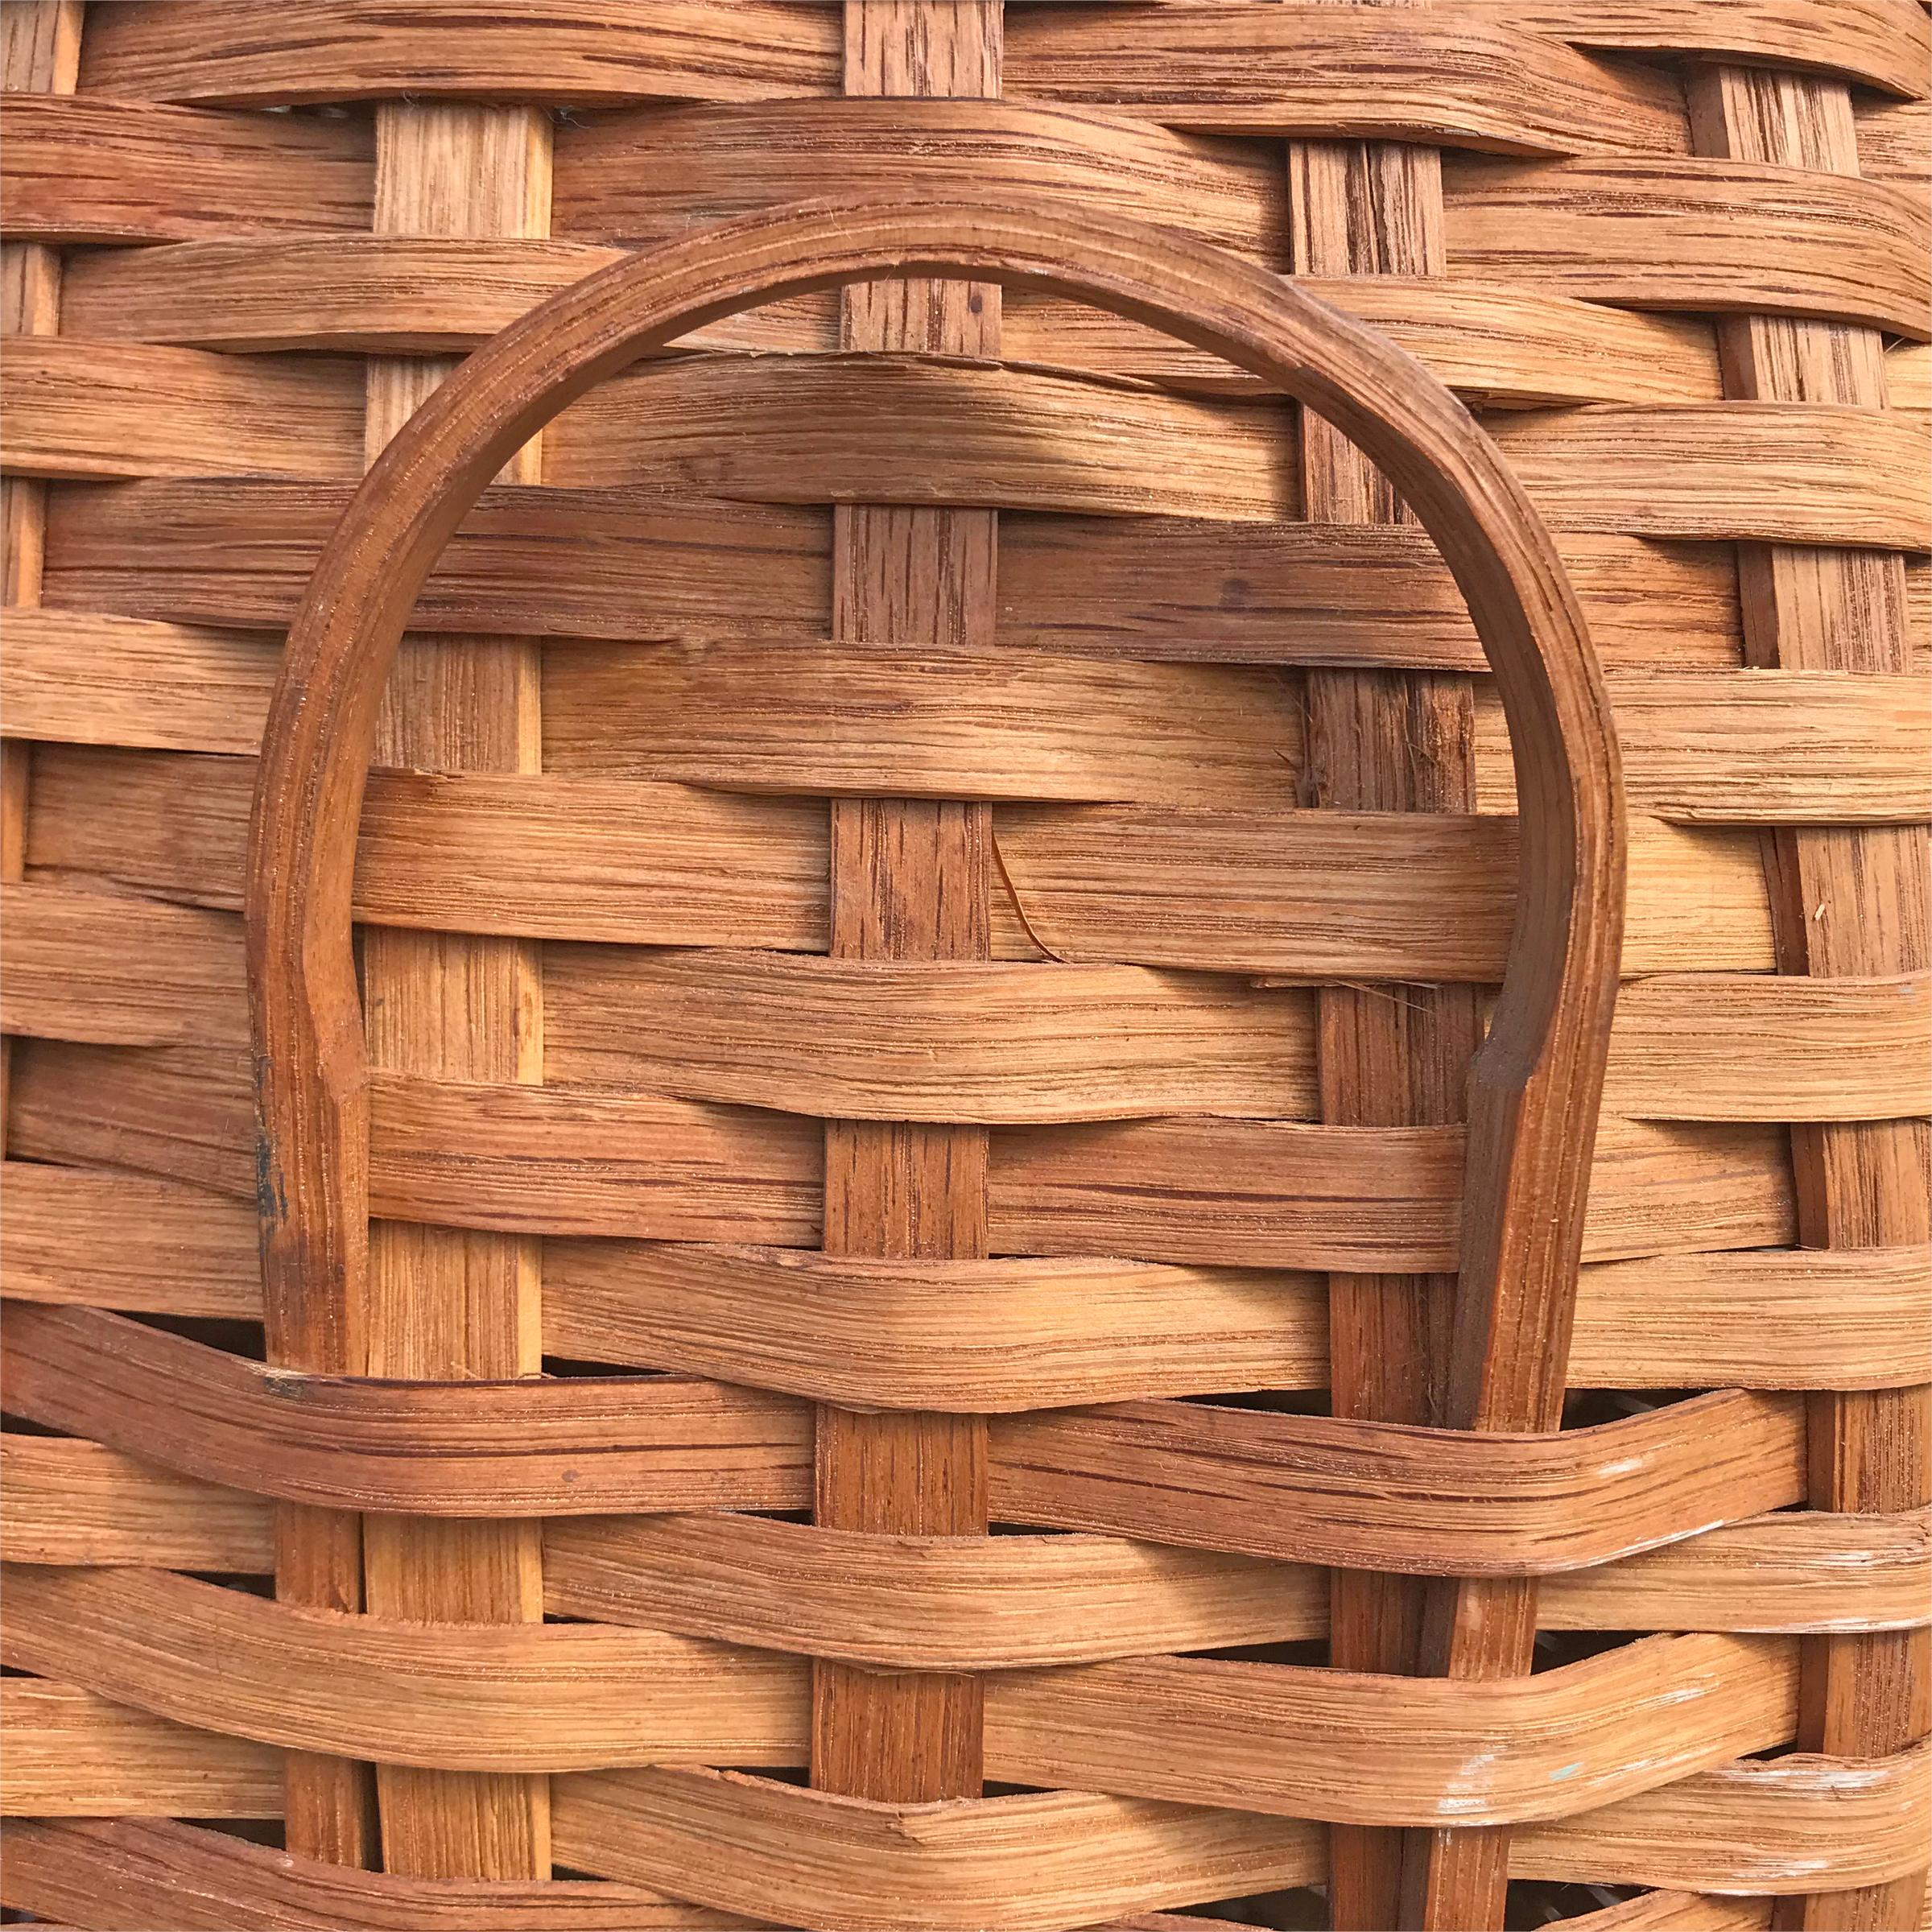 Hand-Woven Early 20th Century American Feather Basket